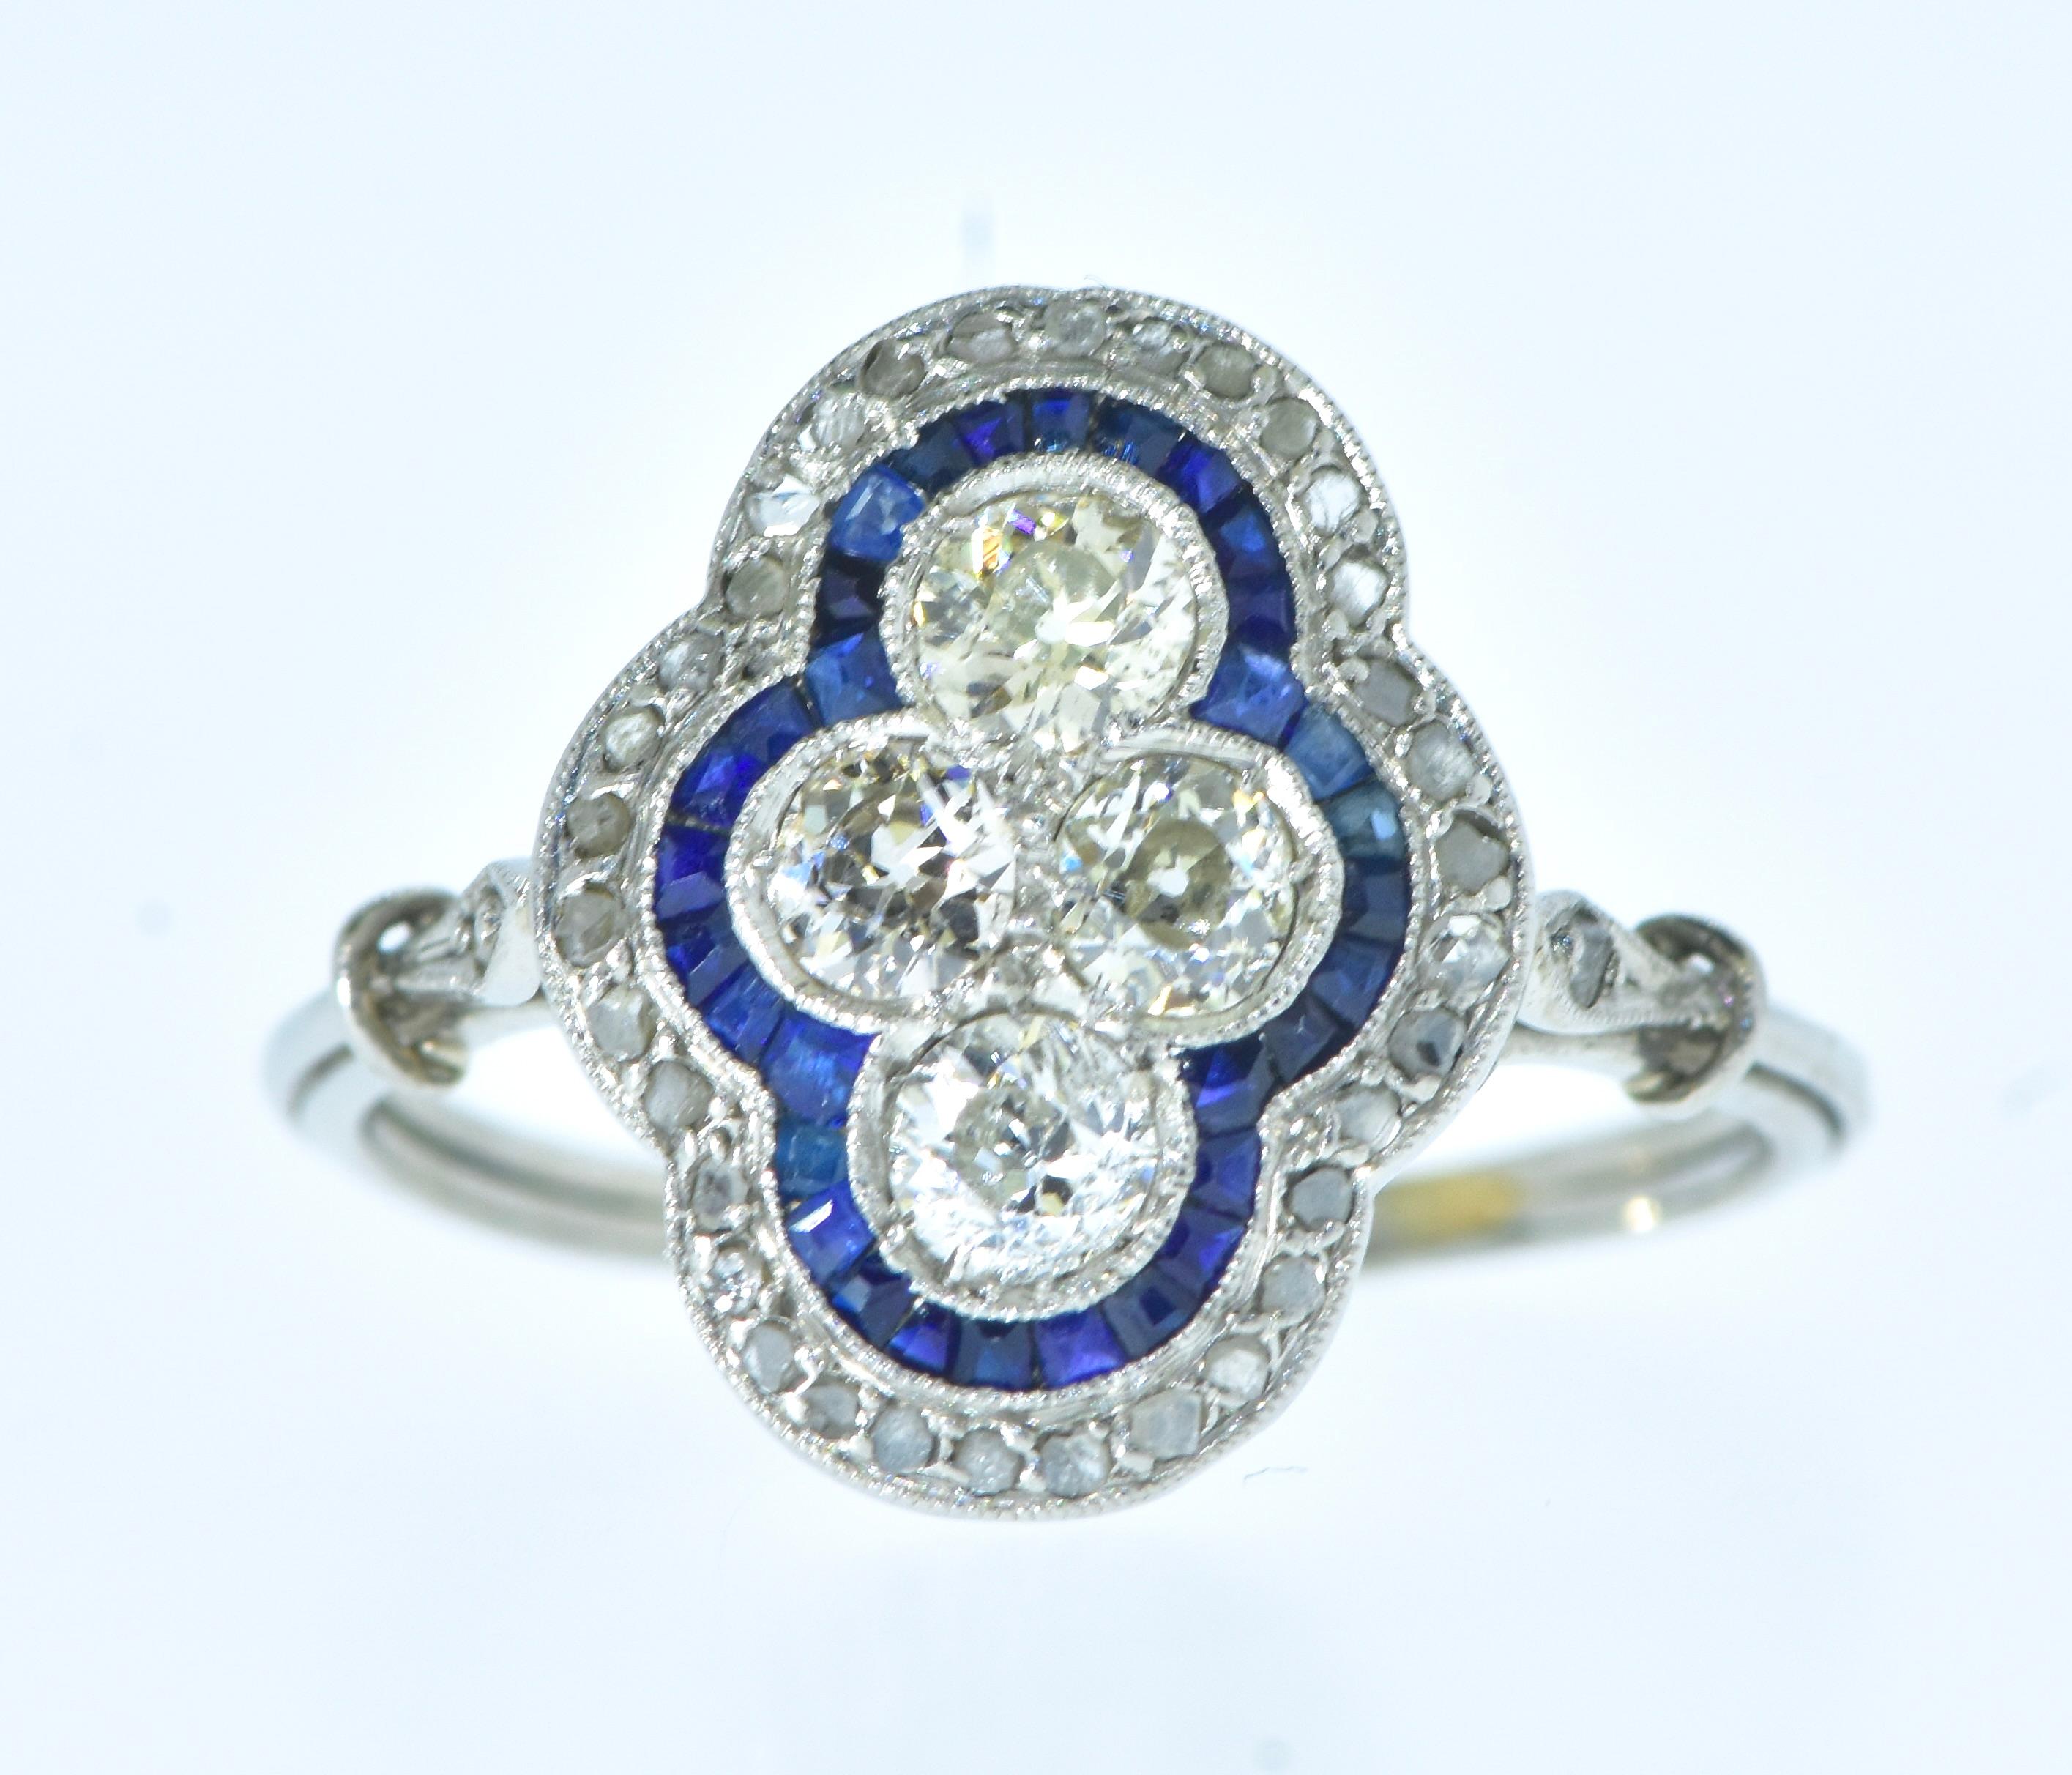 Antique Edwardian Diamond and Sapphire Ring in excellent condition, circa 1915 For Sale 2